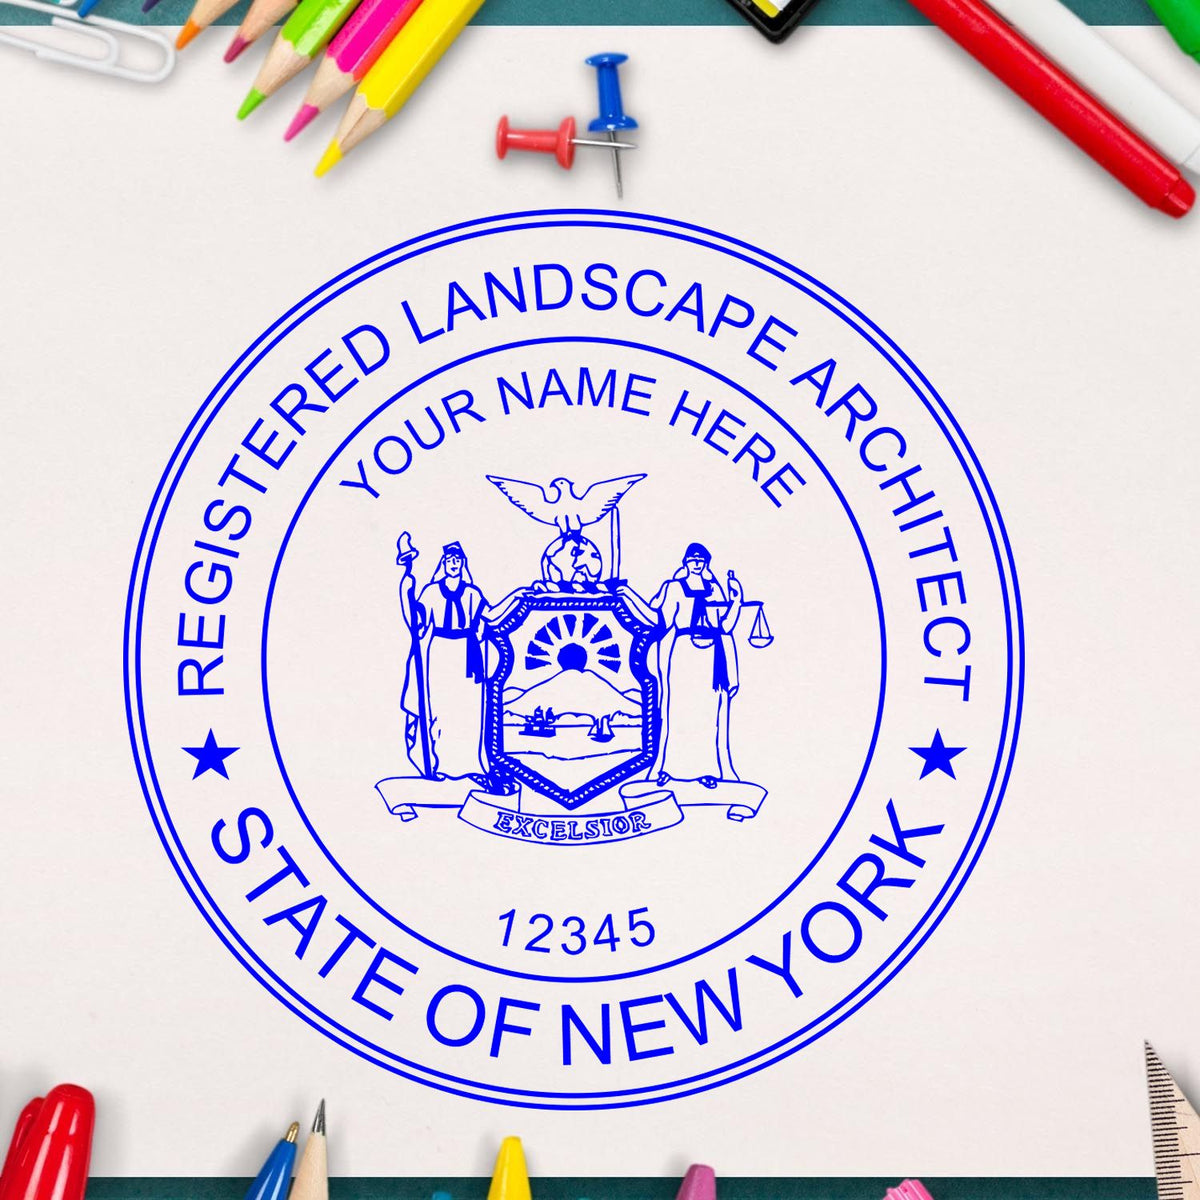 The Digital New York Landscape Architect Stamp stamp impression comes to life with a crisp, detailed photo on paper - showcasing true professional quality.